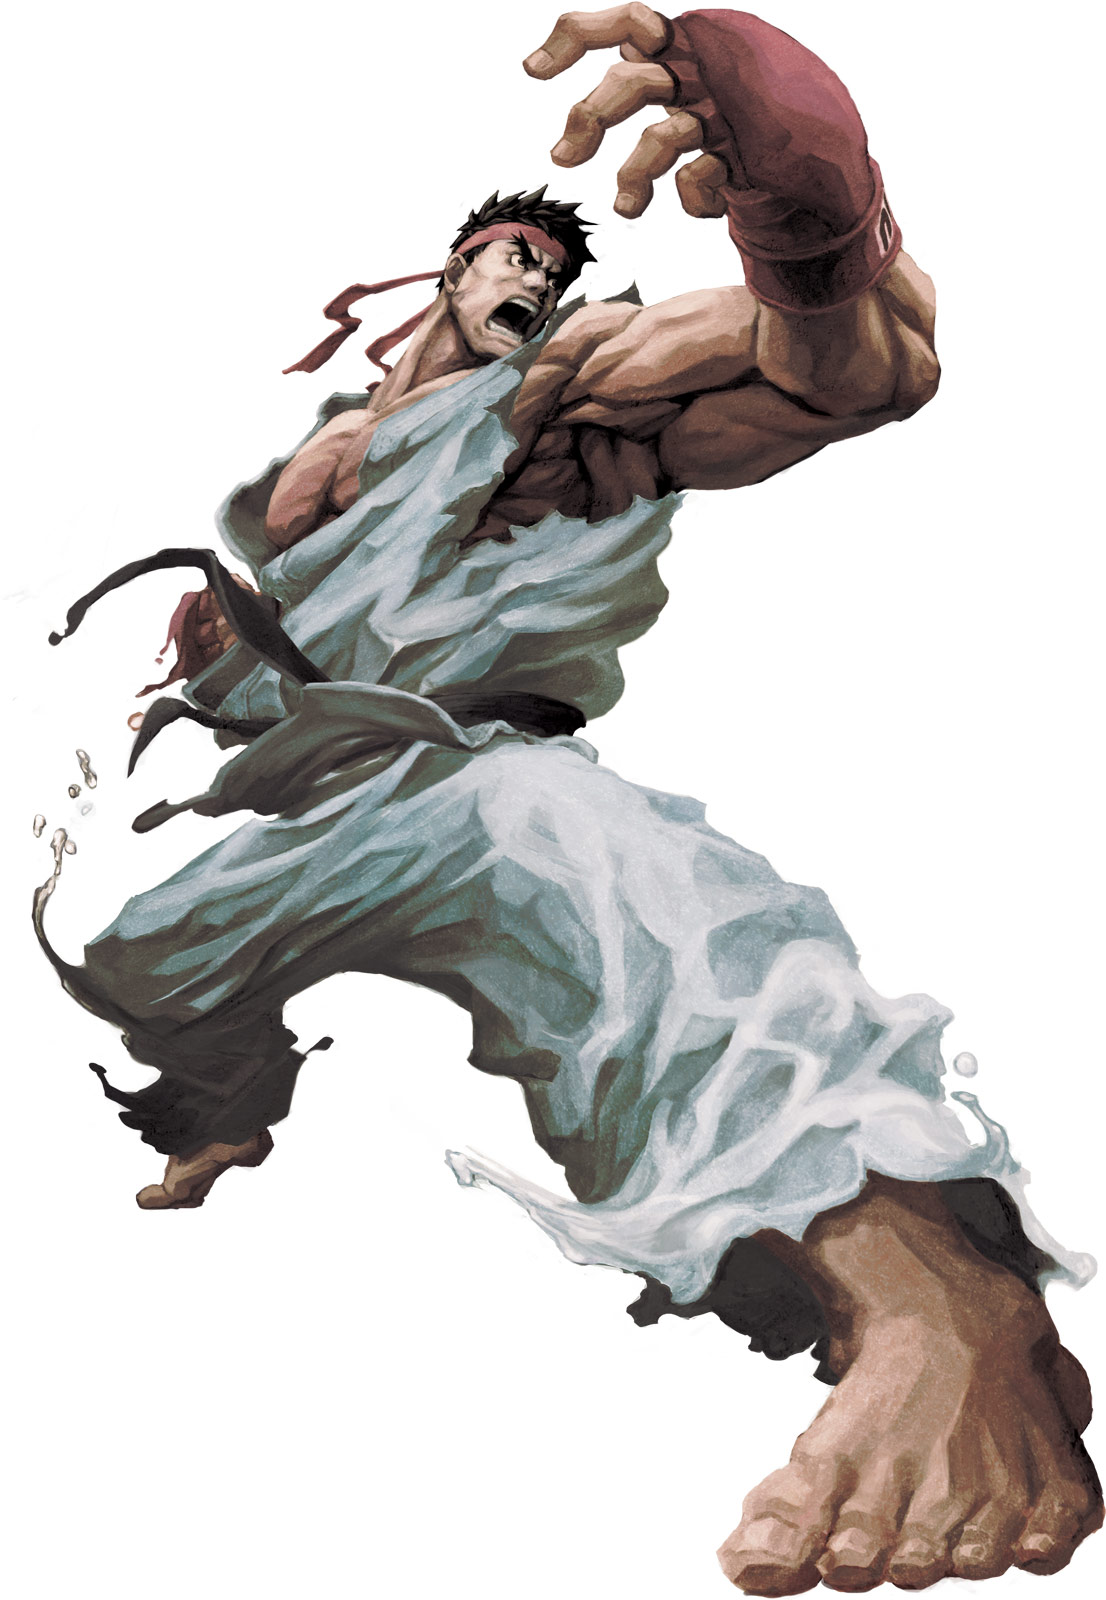 Ryu Street Fighter Alpha  Street fighter characters, Street